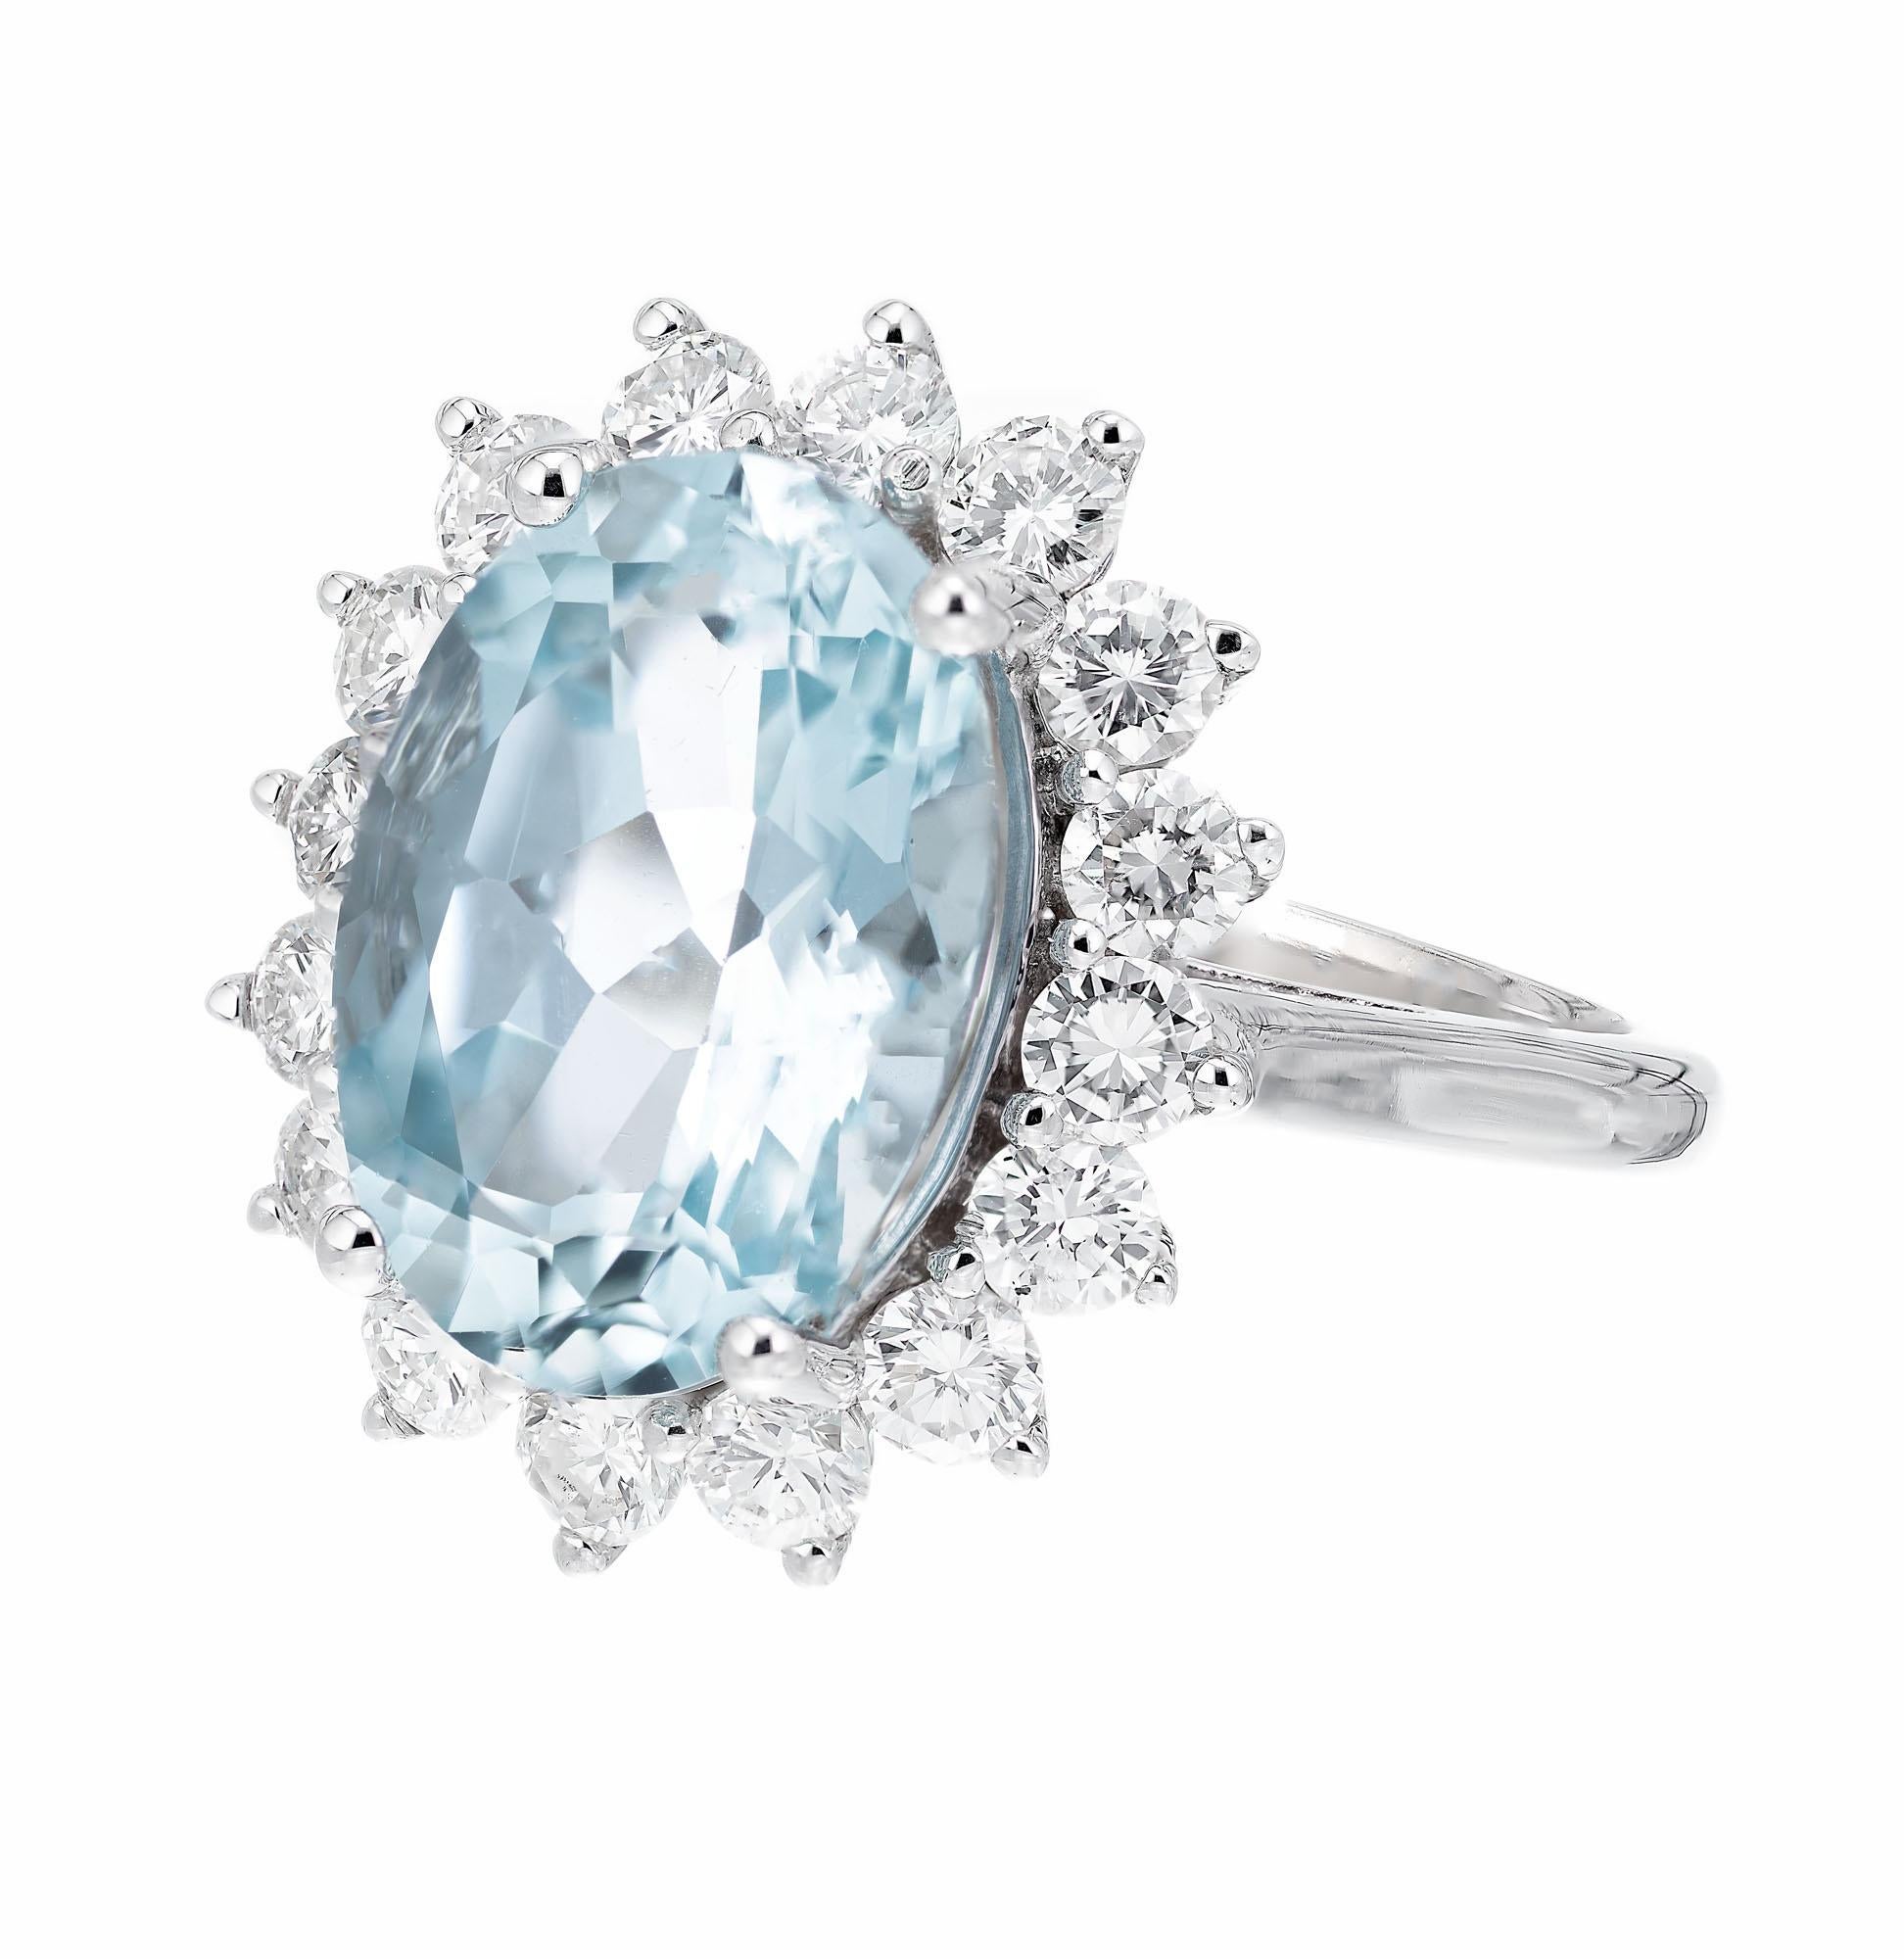 Oval aqua center stone with a halo of 16 round diamonds in a 14k white gold setting. 

1 oval faceted Aquamarine, approx total weight: 4.75cts
16 round brilliant cut diamonds, approx total weight 1.10cts  G-H, VS
Size: 6.5 and sizable
6.4